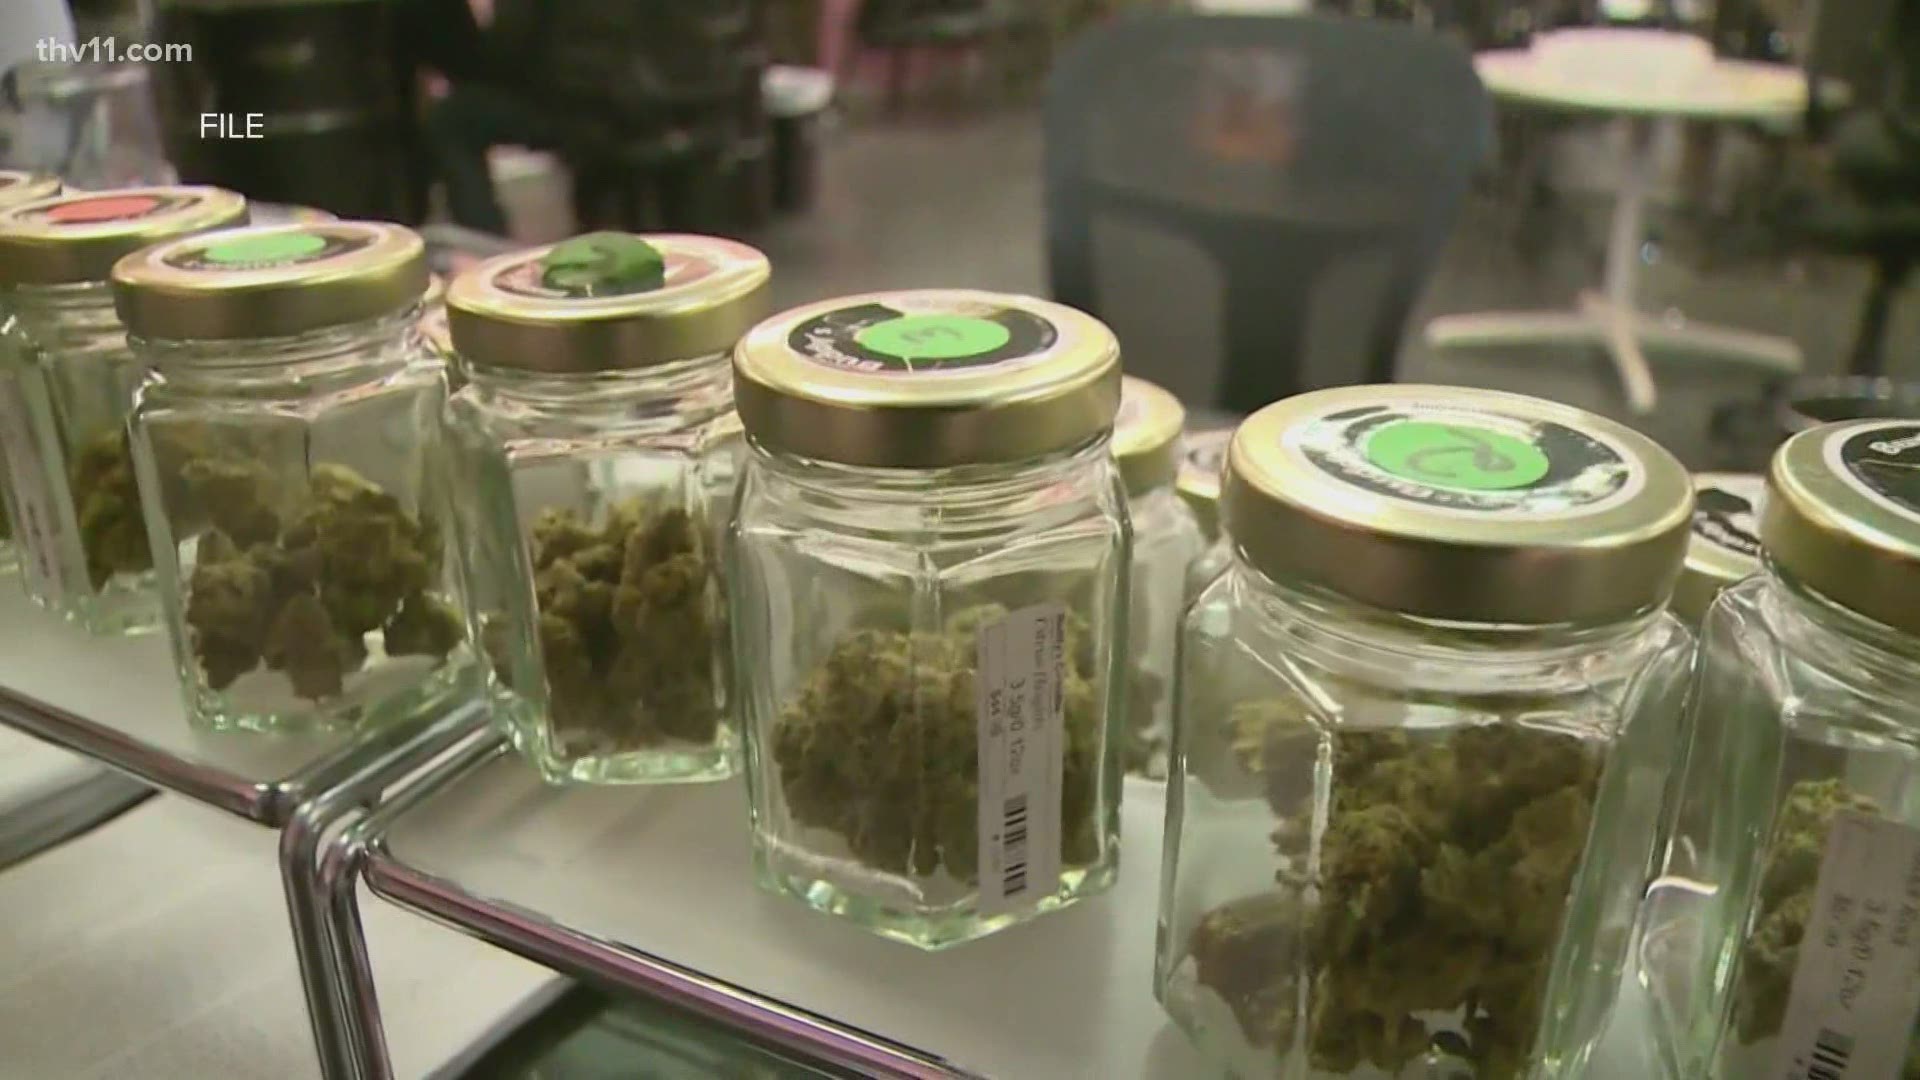 Arkansans have now bought 25,000 pounds of medical marijuana since it became legal in the state.